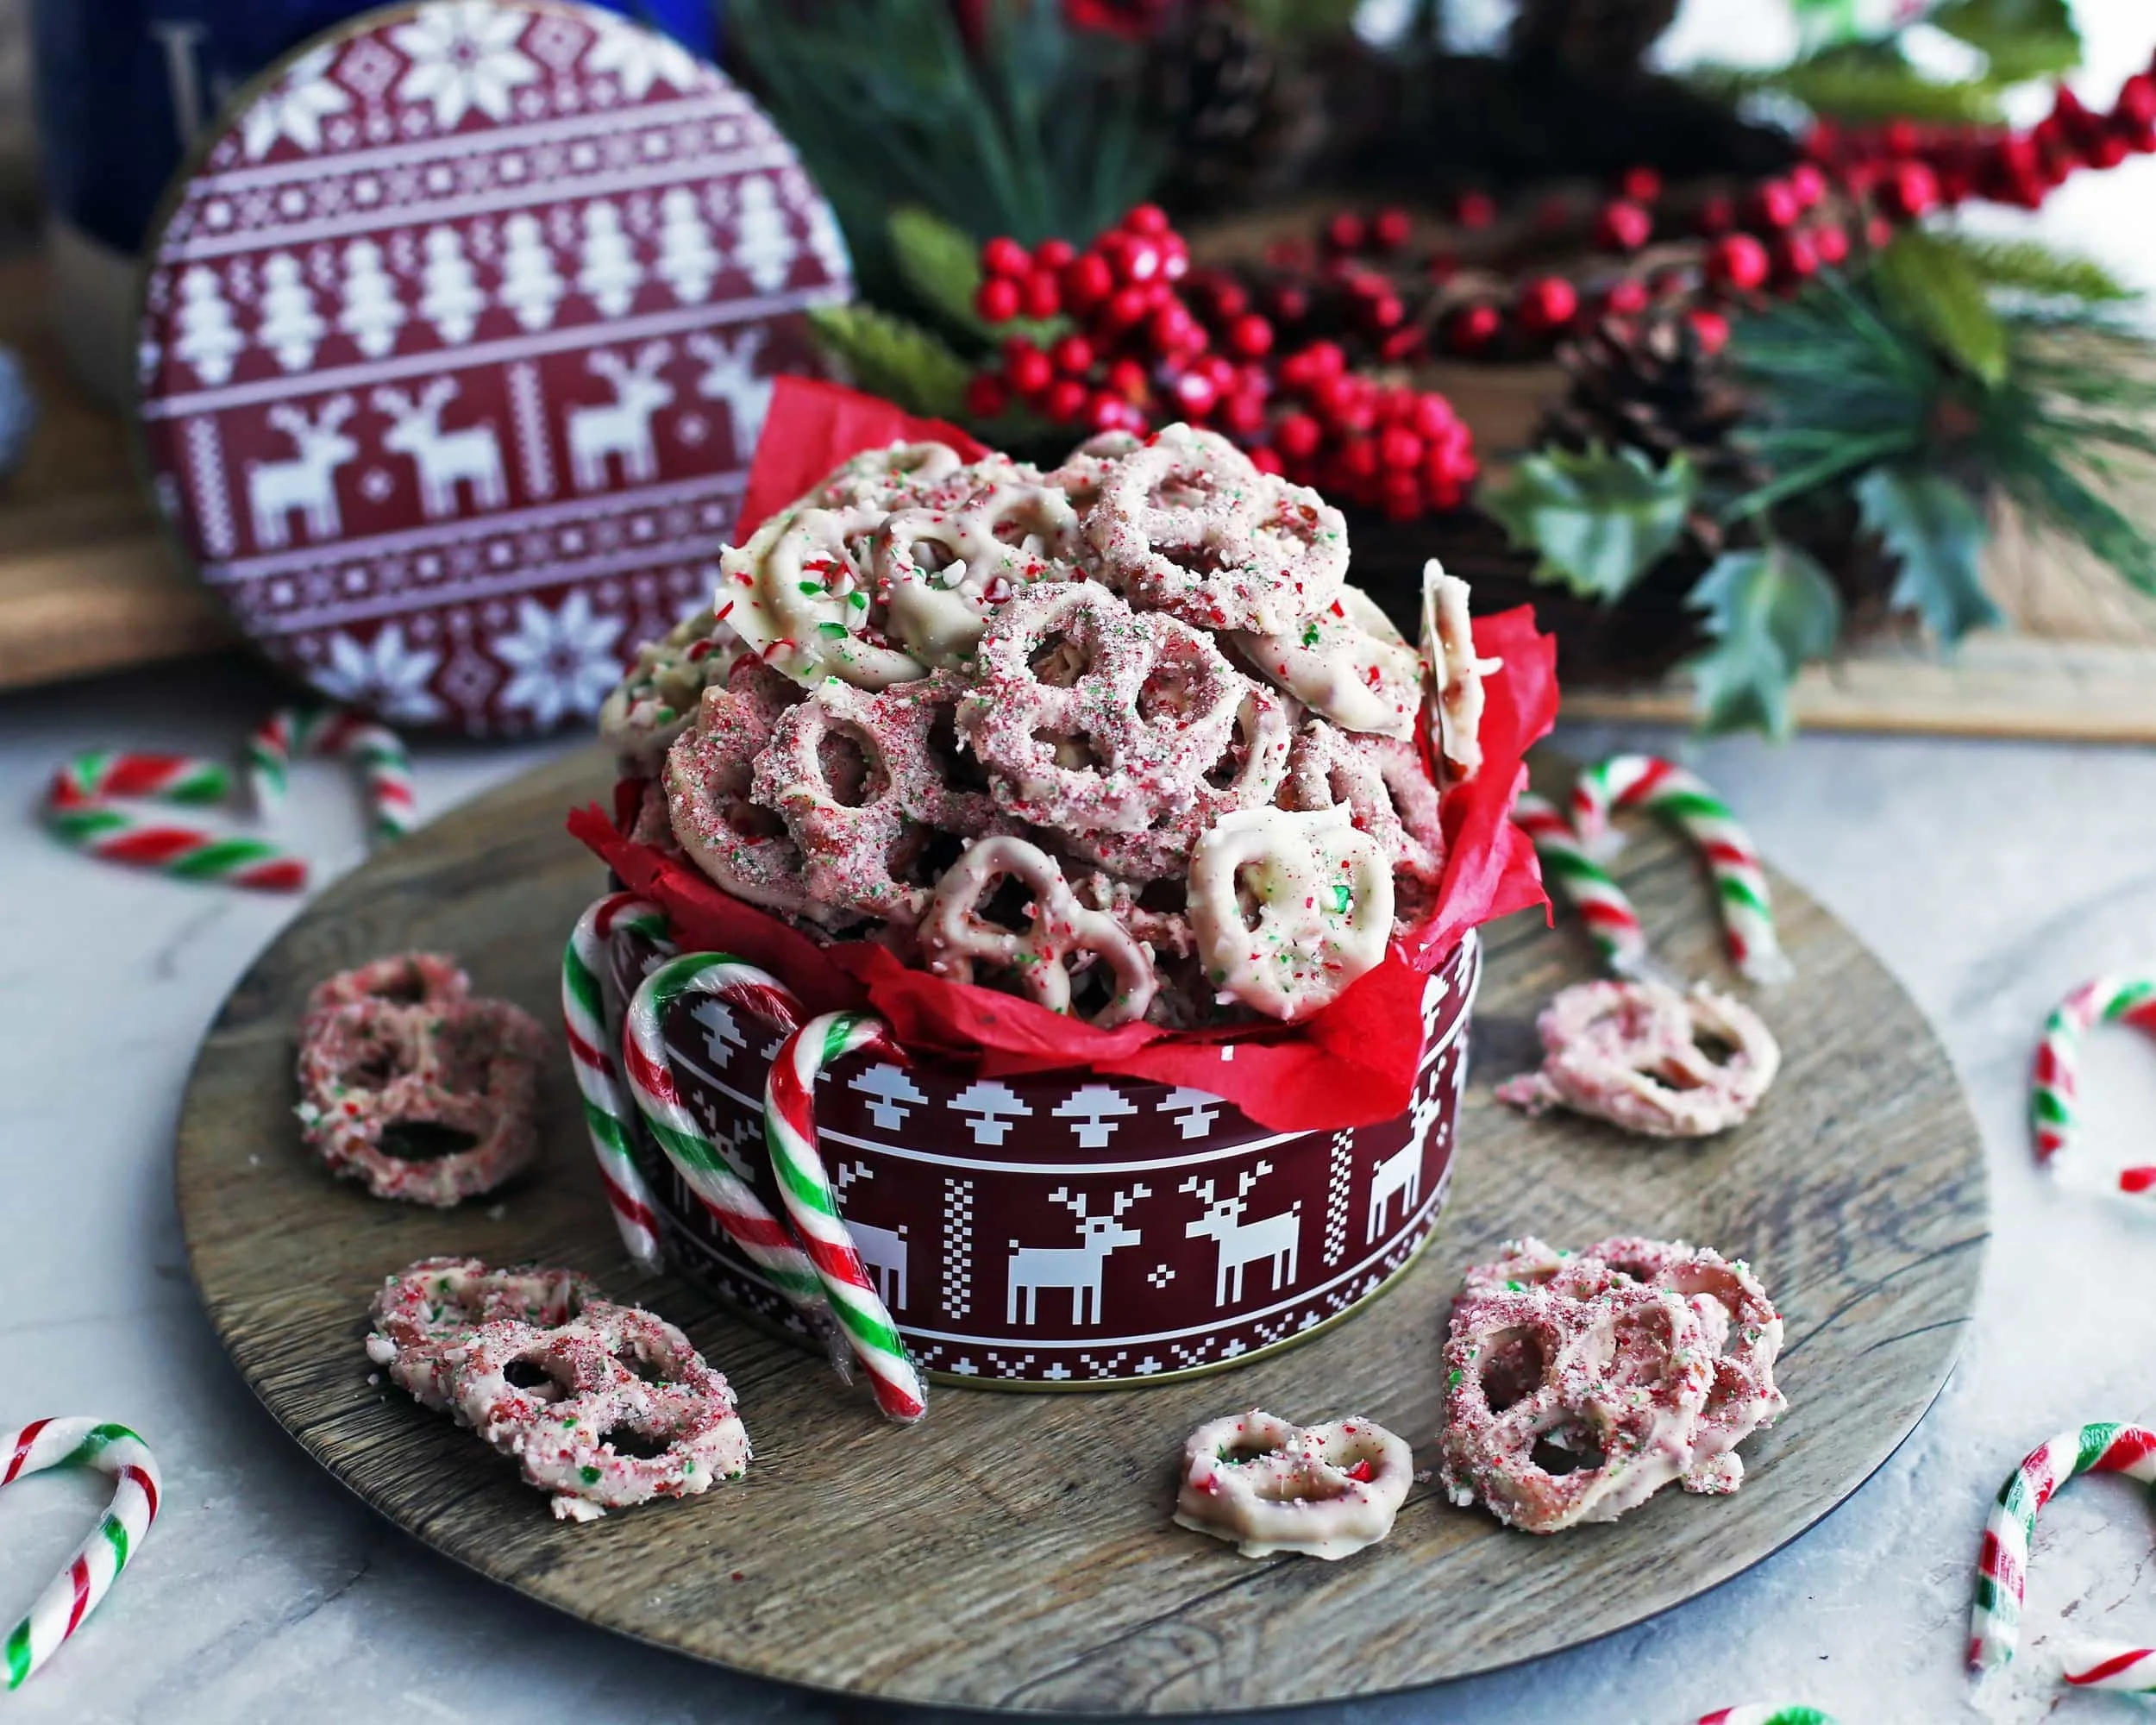 Four-ingredient candy cane chocolate-covered pretzels overflowing in a large red tin.